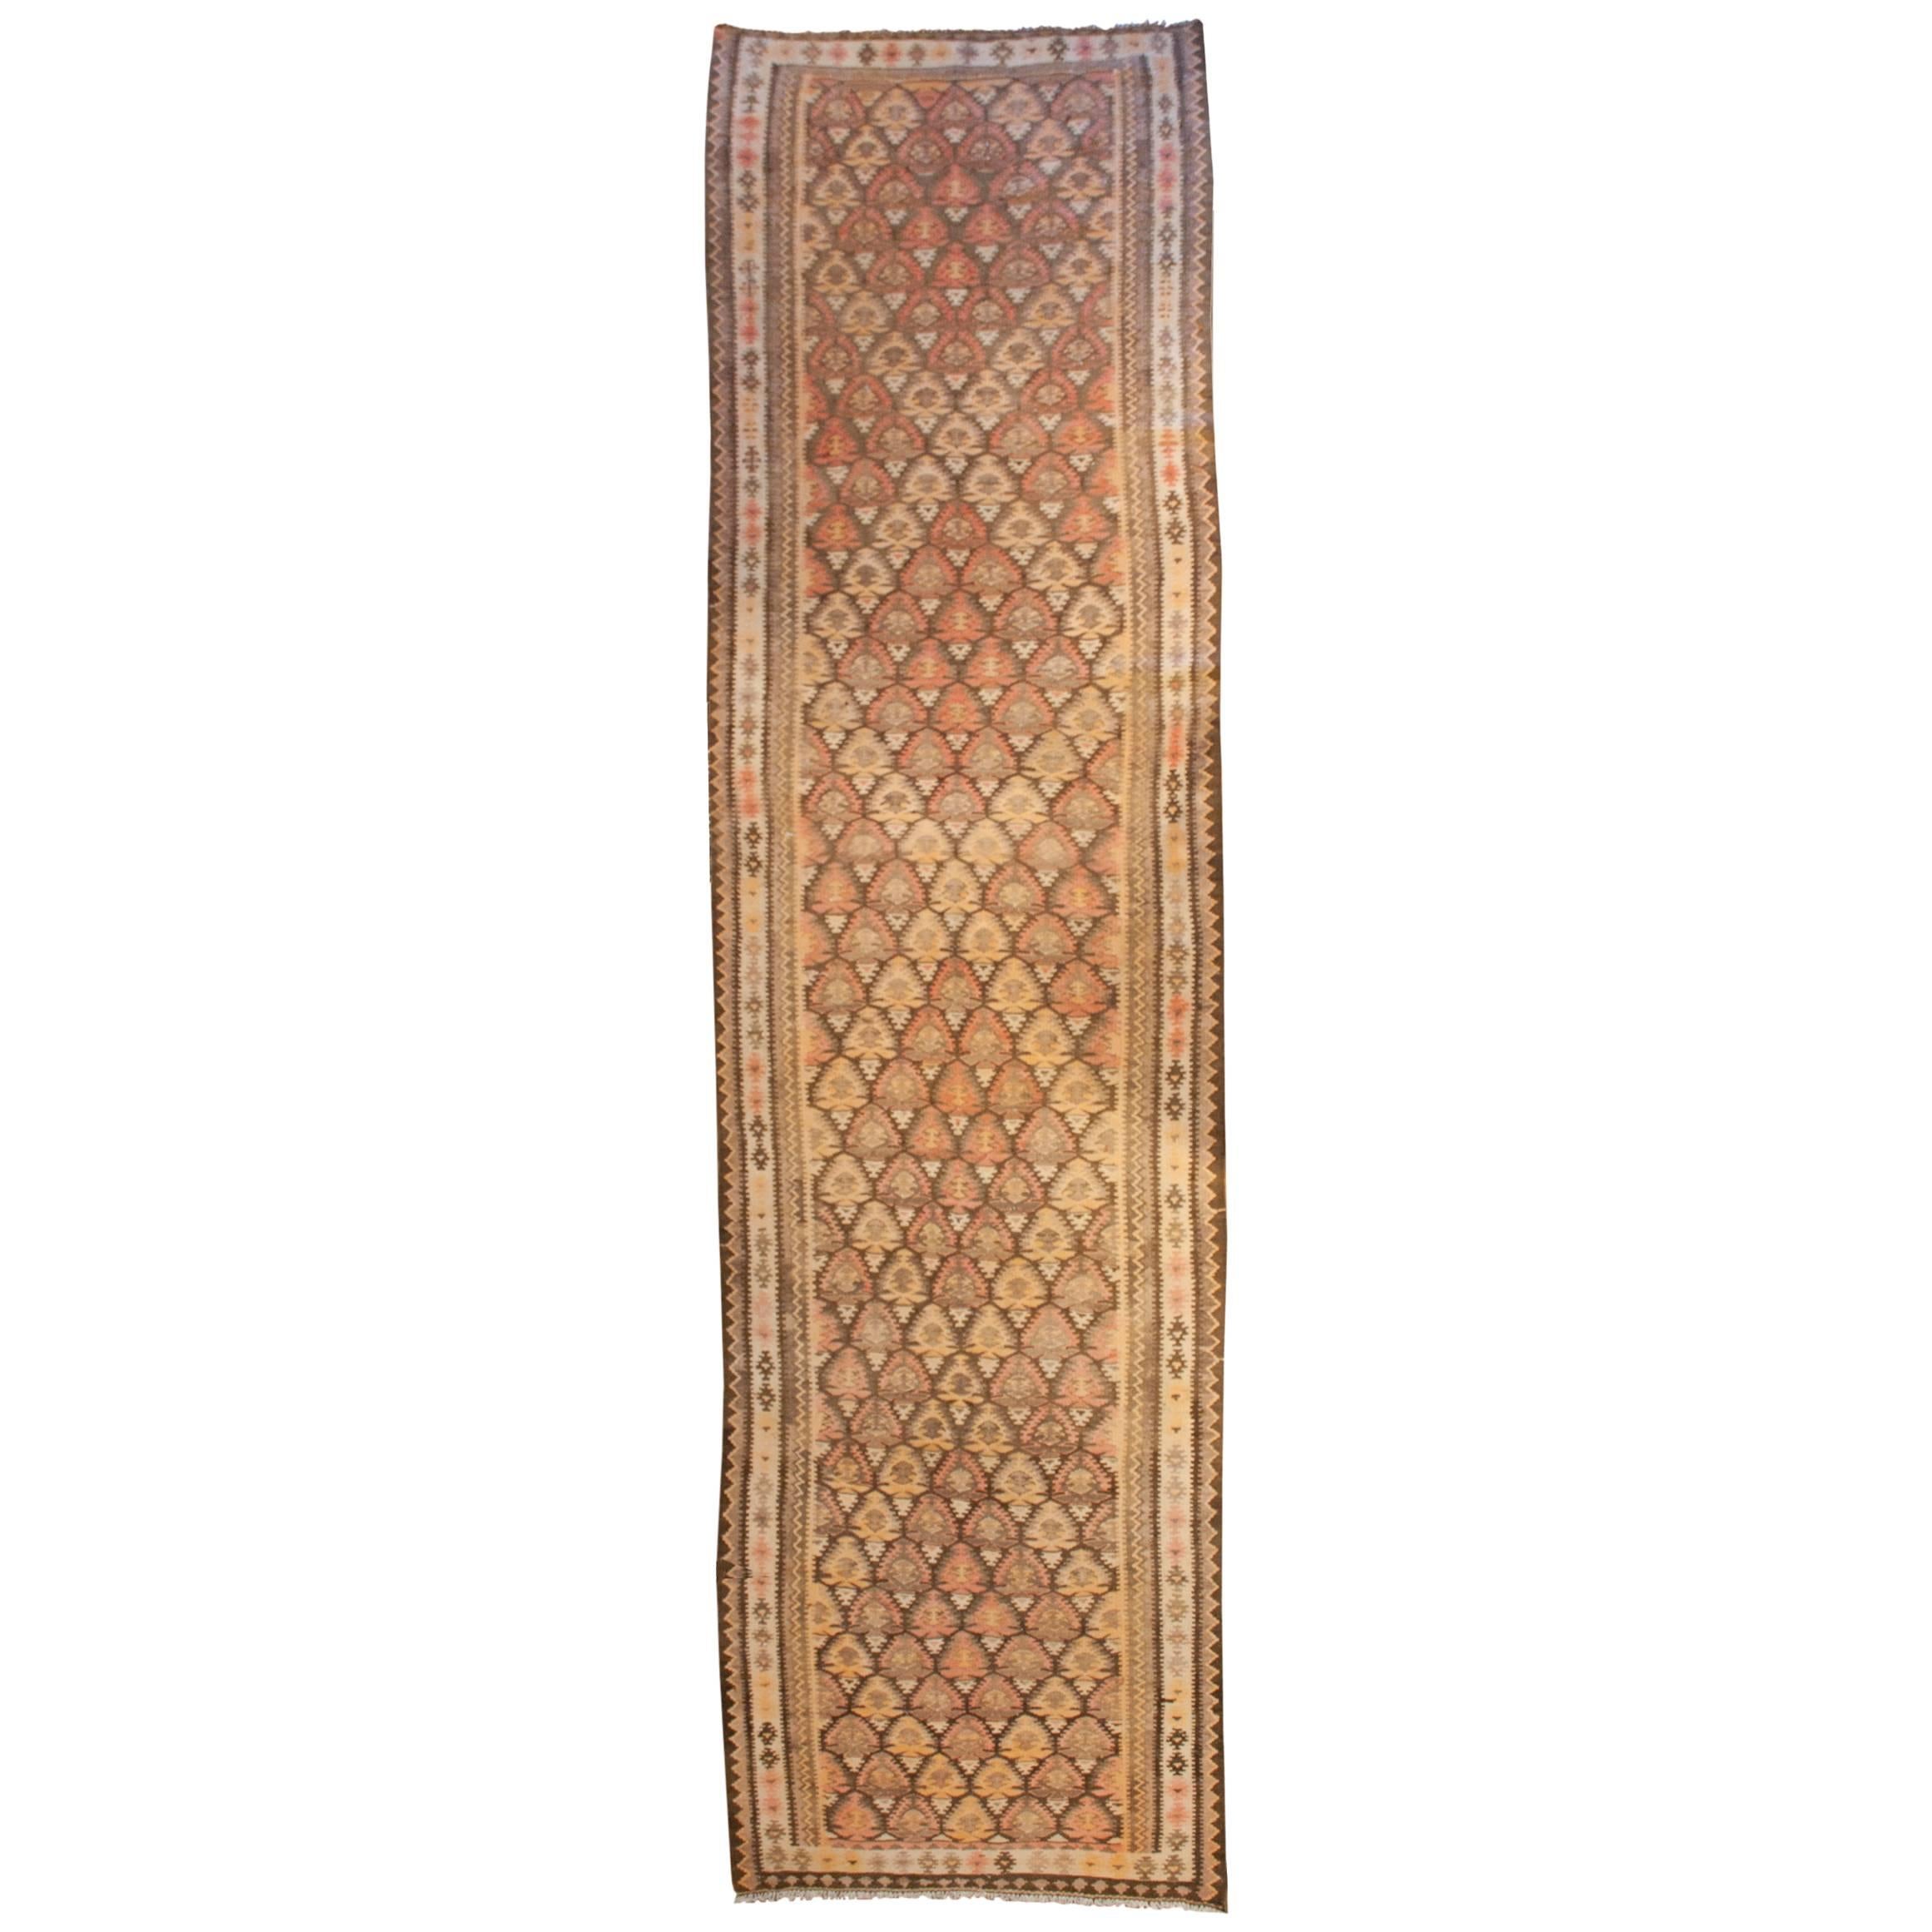 Wonderful Early 20th Century Qazvin Runner For Sale